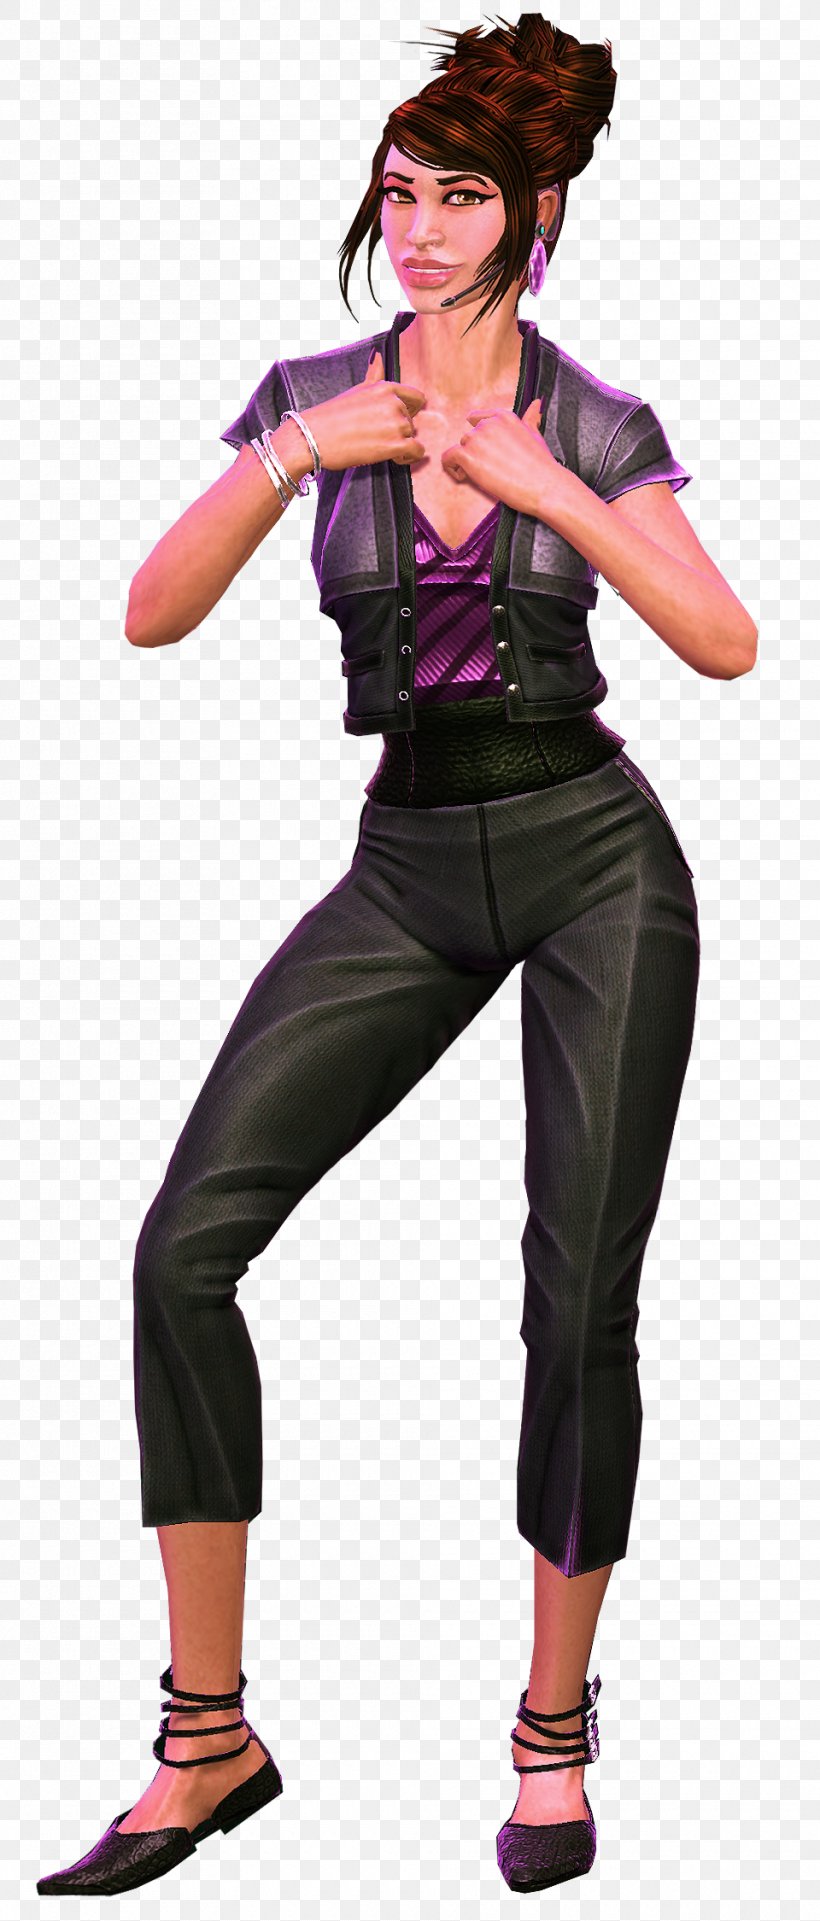 Dance Central 3 Dance Central 2 Wikia Video Game, PNG, 960x2250px, Dance Central 3, Audio, Costume, Dance Central, Dance Central 2 Download Free